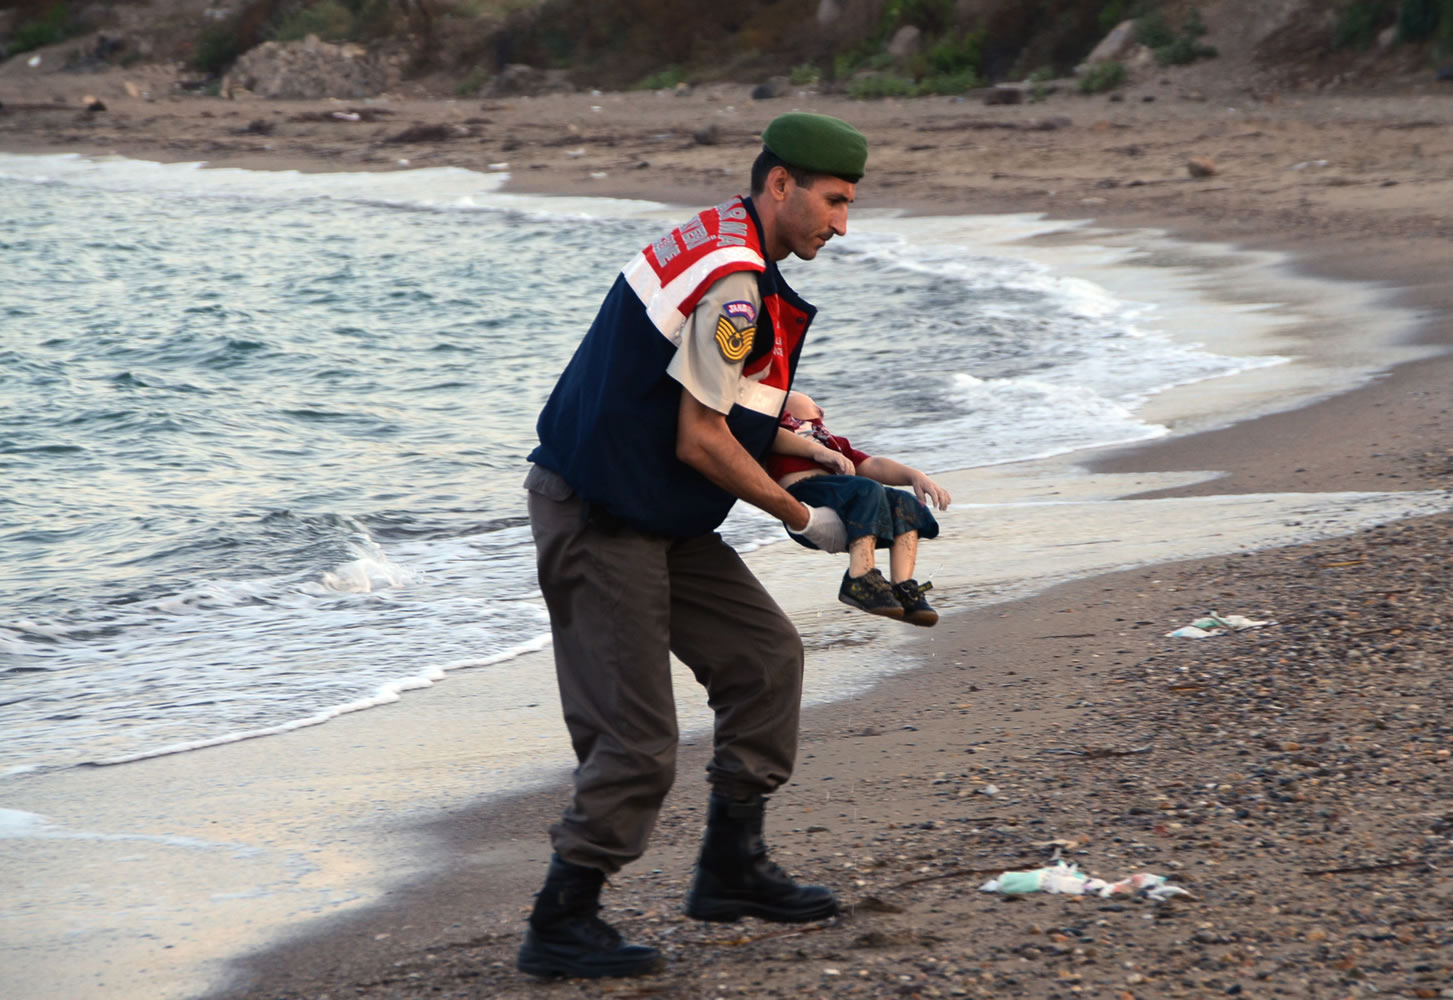 A paramilitary police officer carries the lifeless body of an unidentified migrant child, lifting it from the sea shore, near the Turkish resort of Bodrum, Turkey,  early Wednesday, Sept. 2, 2015.  A number of migrants are known to have died and some are still reported missing, after boats carrying them to the Greek island of Kos capsized.